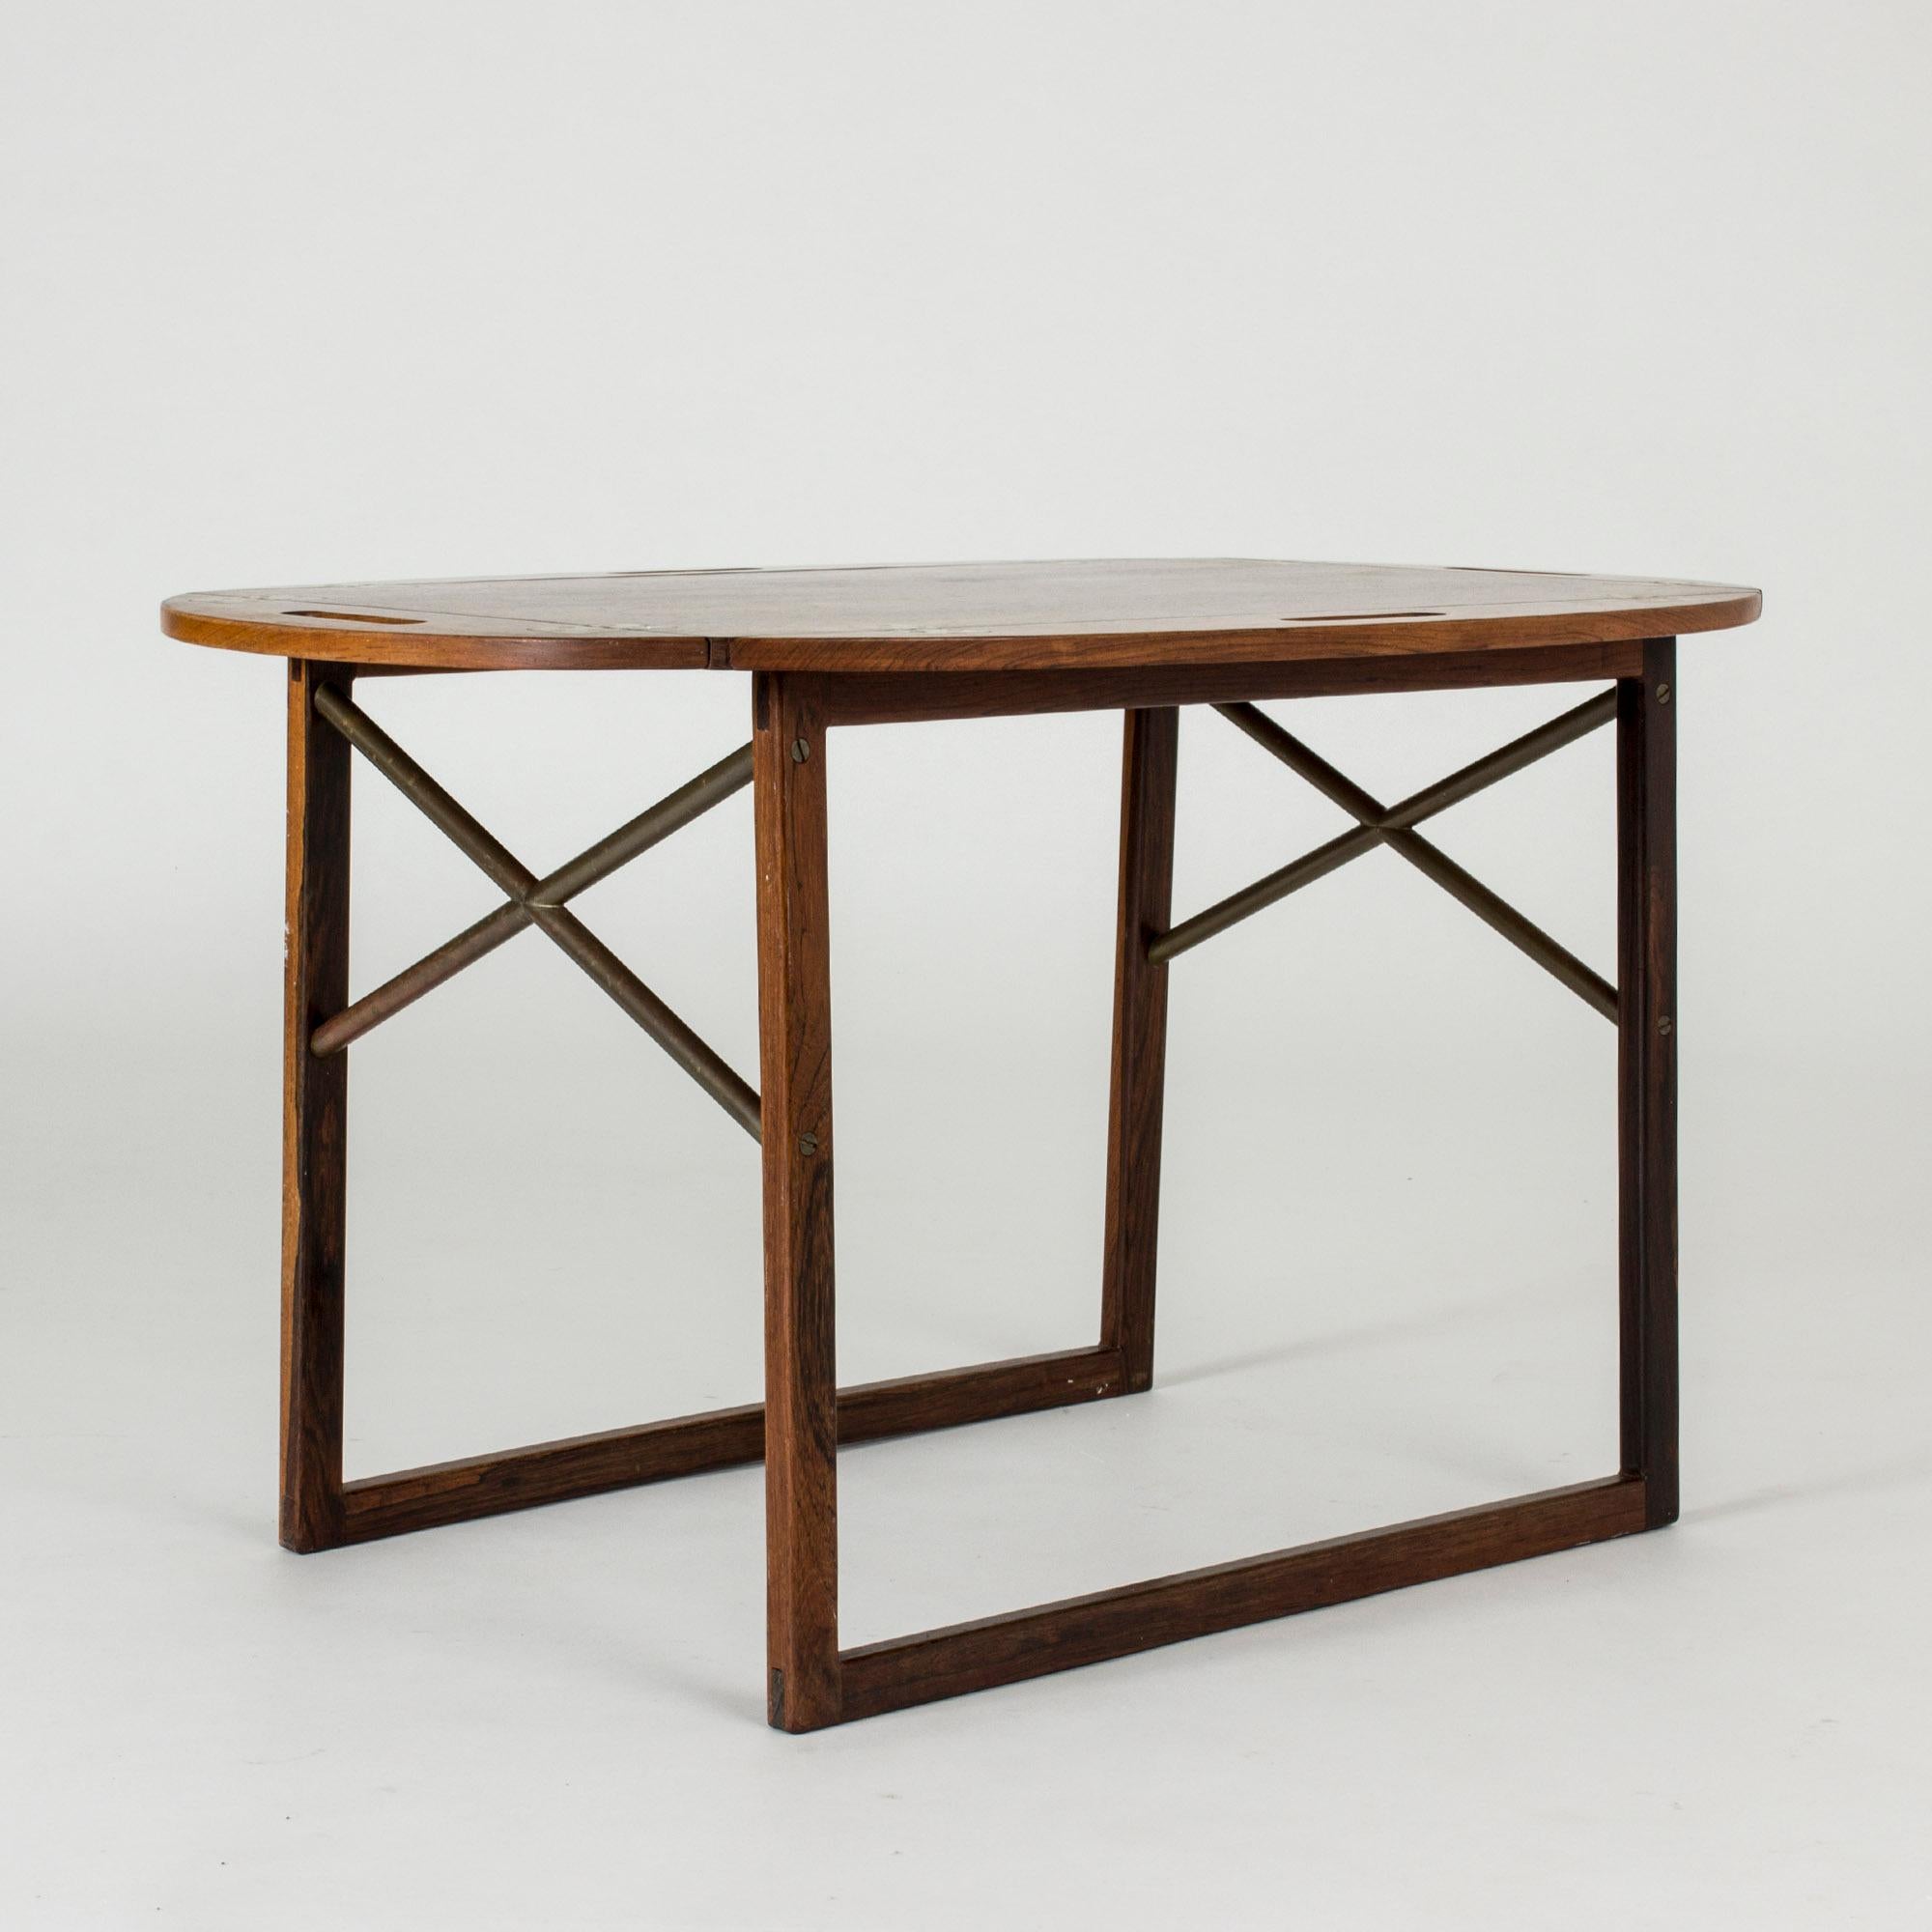 Elegant rosewood coffee table by Svend Langkilde, with a top that can be lifted off as a tray. Four handles and the possibility to turn up the edges of the table. Neat sled base with X-shaped detail gives it a distinct modernist look.